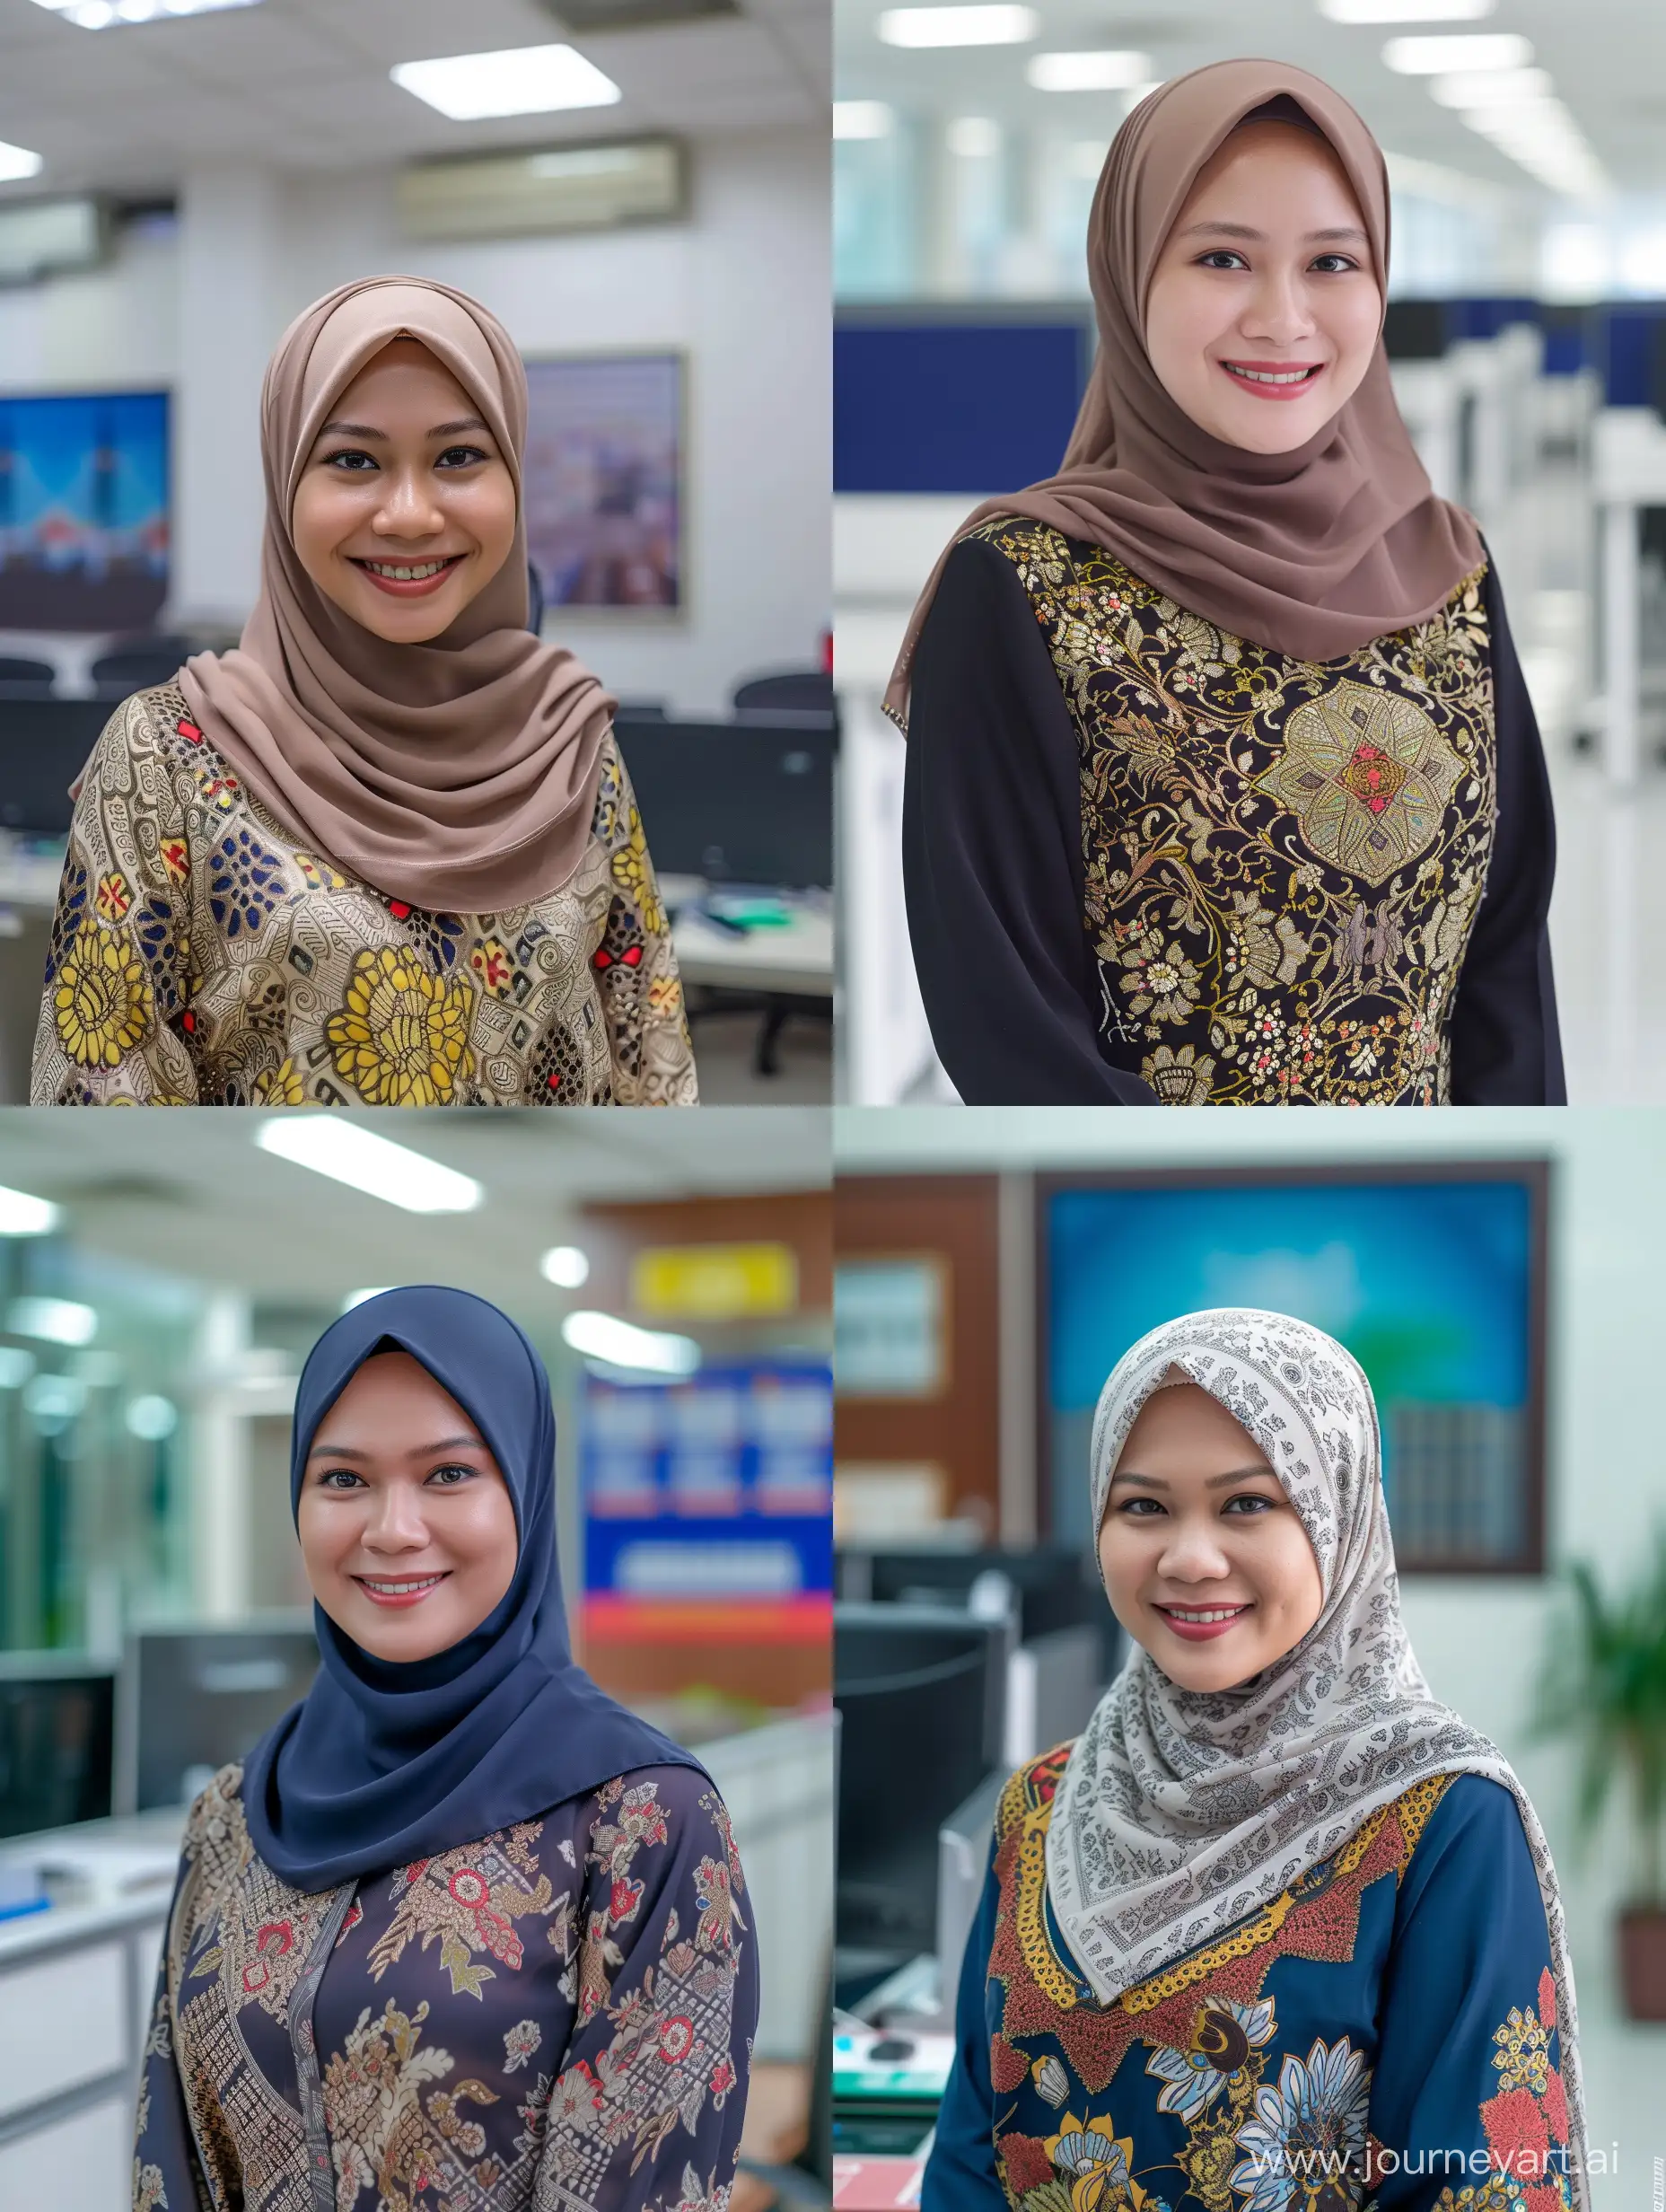 ultra realistic, Malay girl civil servant who is working in the government department. in baju kurung and wearing a hijab. smiling face office background. canon eos-id x mark iii dslr --v 6.0